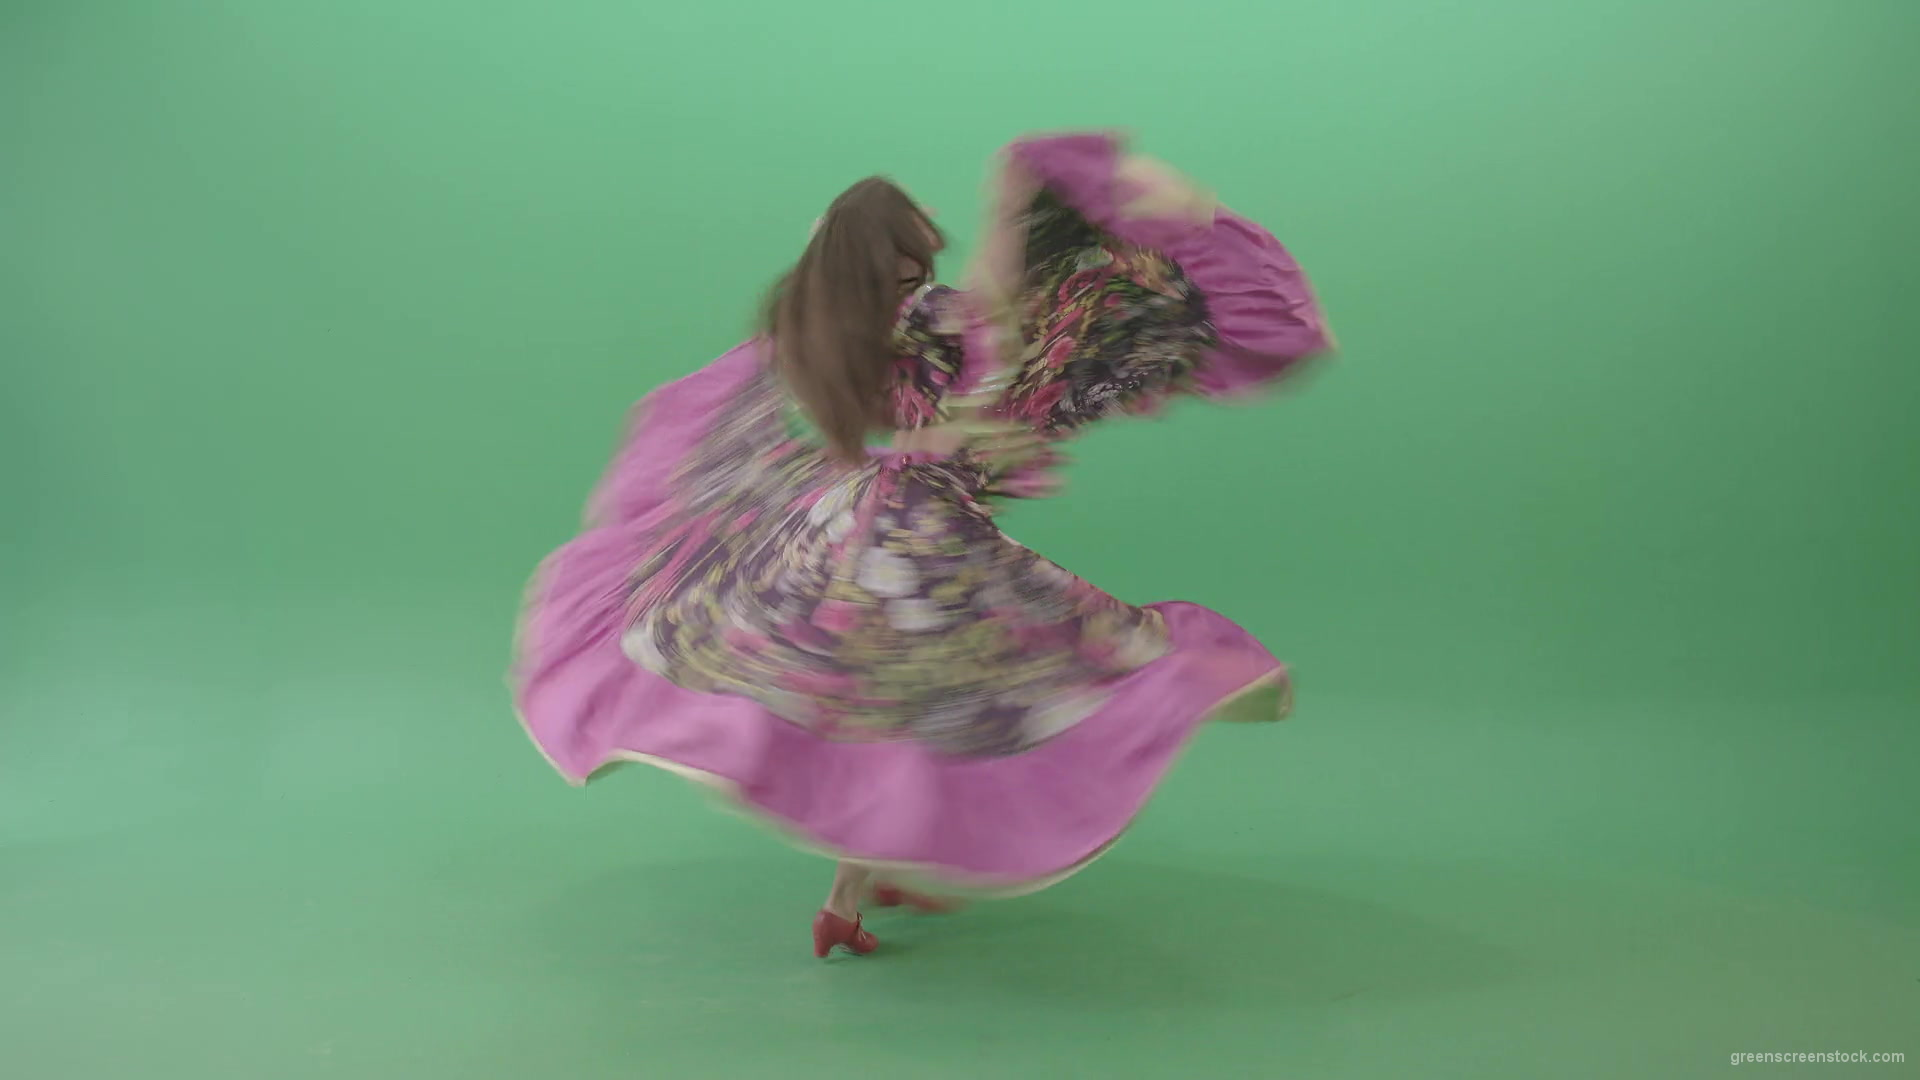 Romatic-moldova-girl-dancing-in-roma-gypsy-dress-isolated-on-green-screen-4K-stock-video-footage-1920_008 Green Screen Stock